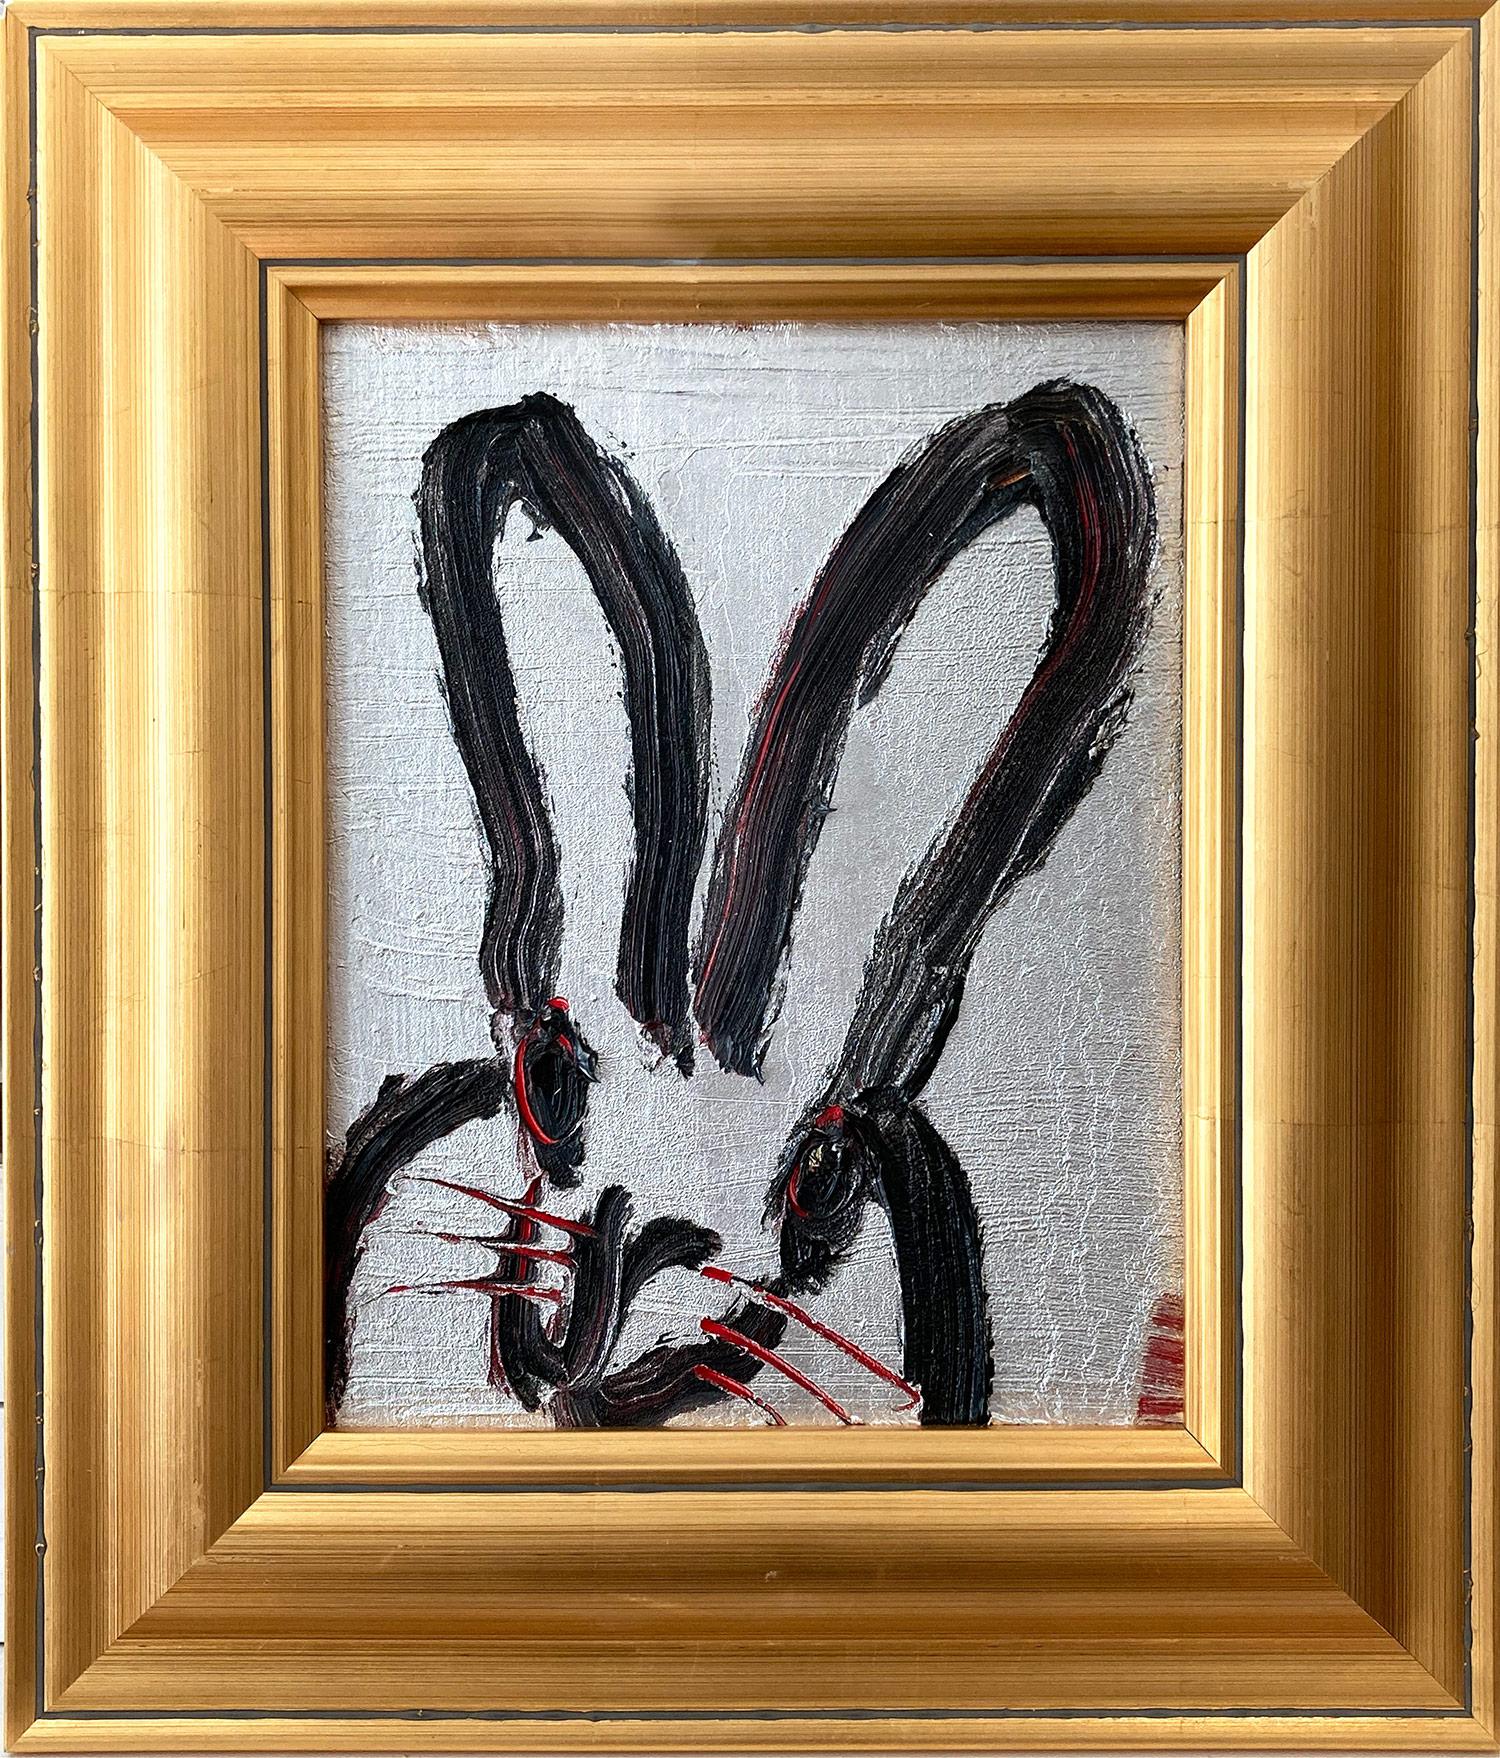 Hunt Slonem Abstract Painting - "Me" Black Bunny on Silver Background with Red Accents Oil Painting on Wood